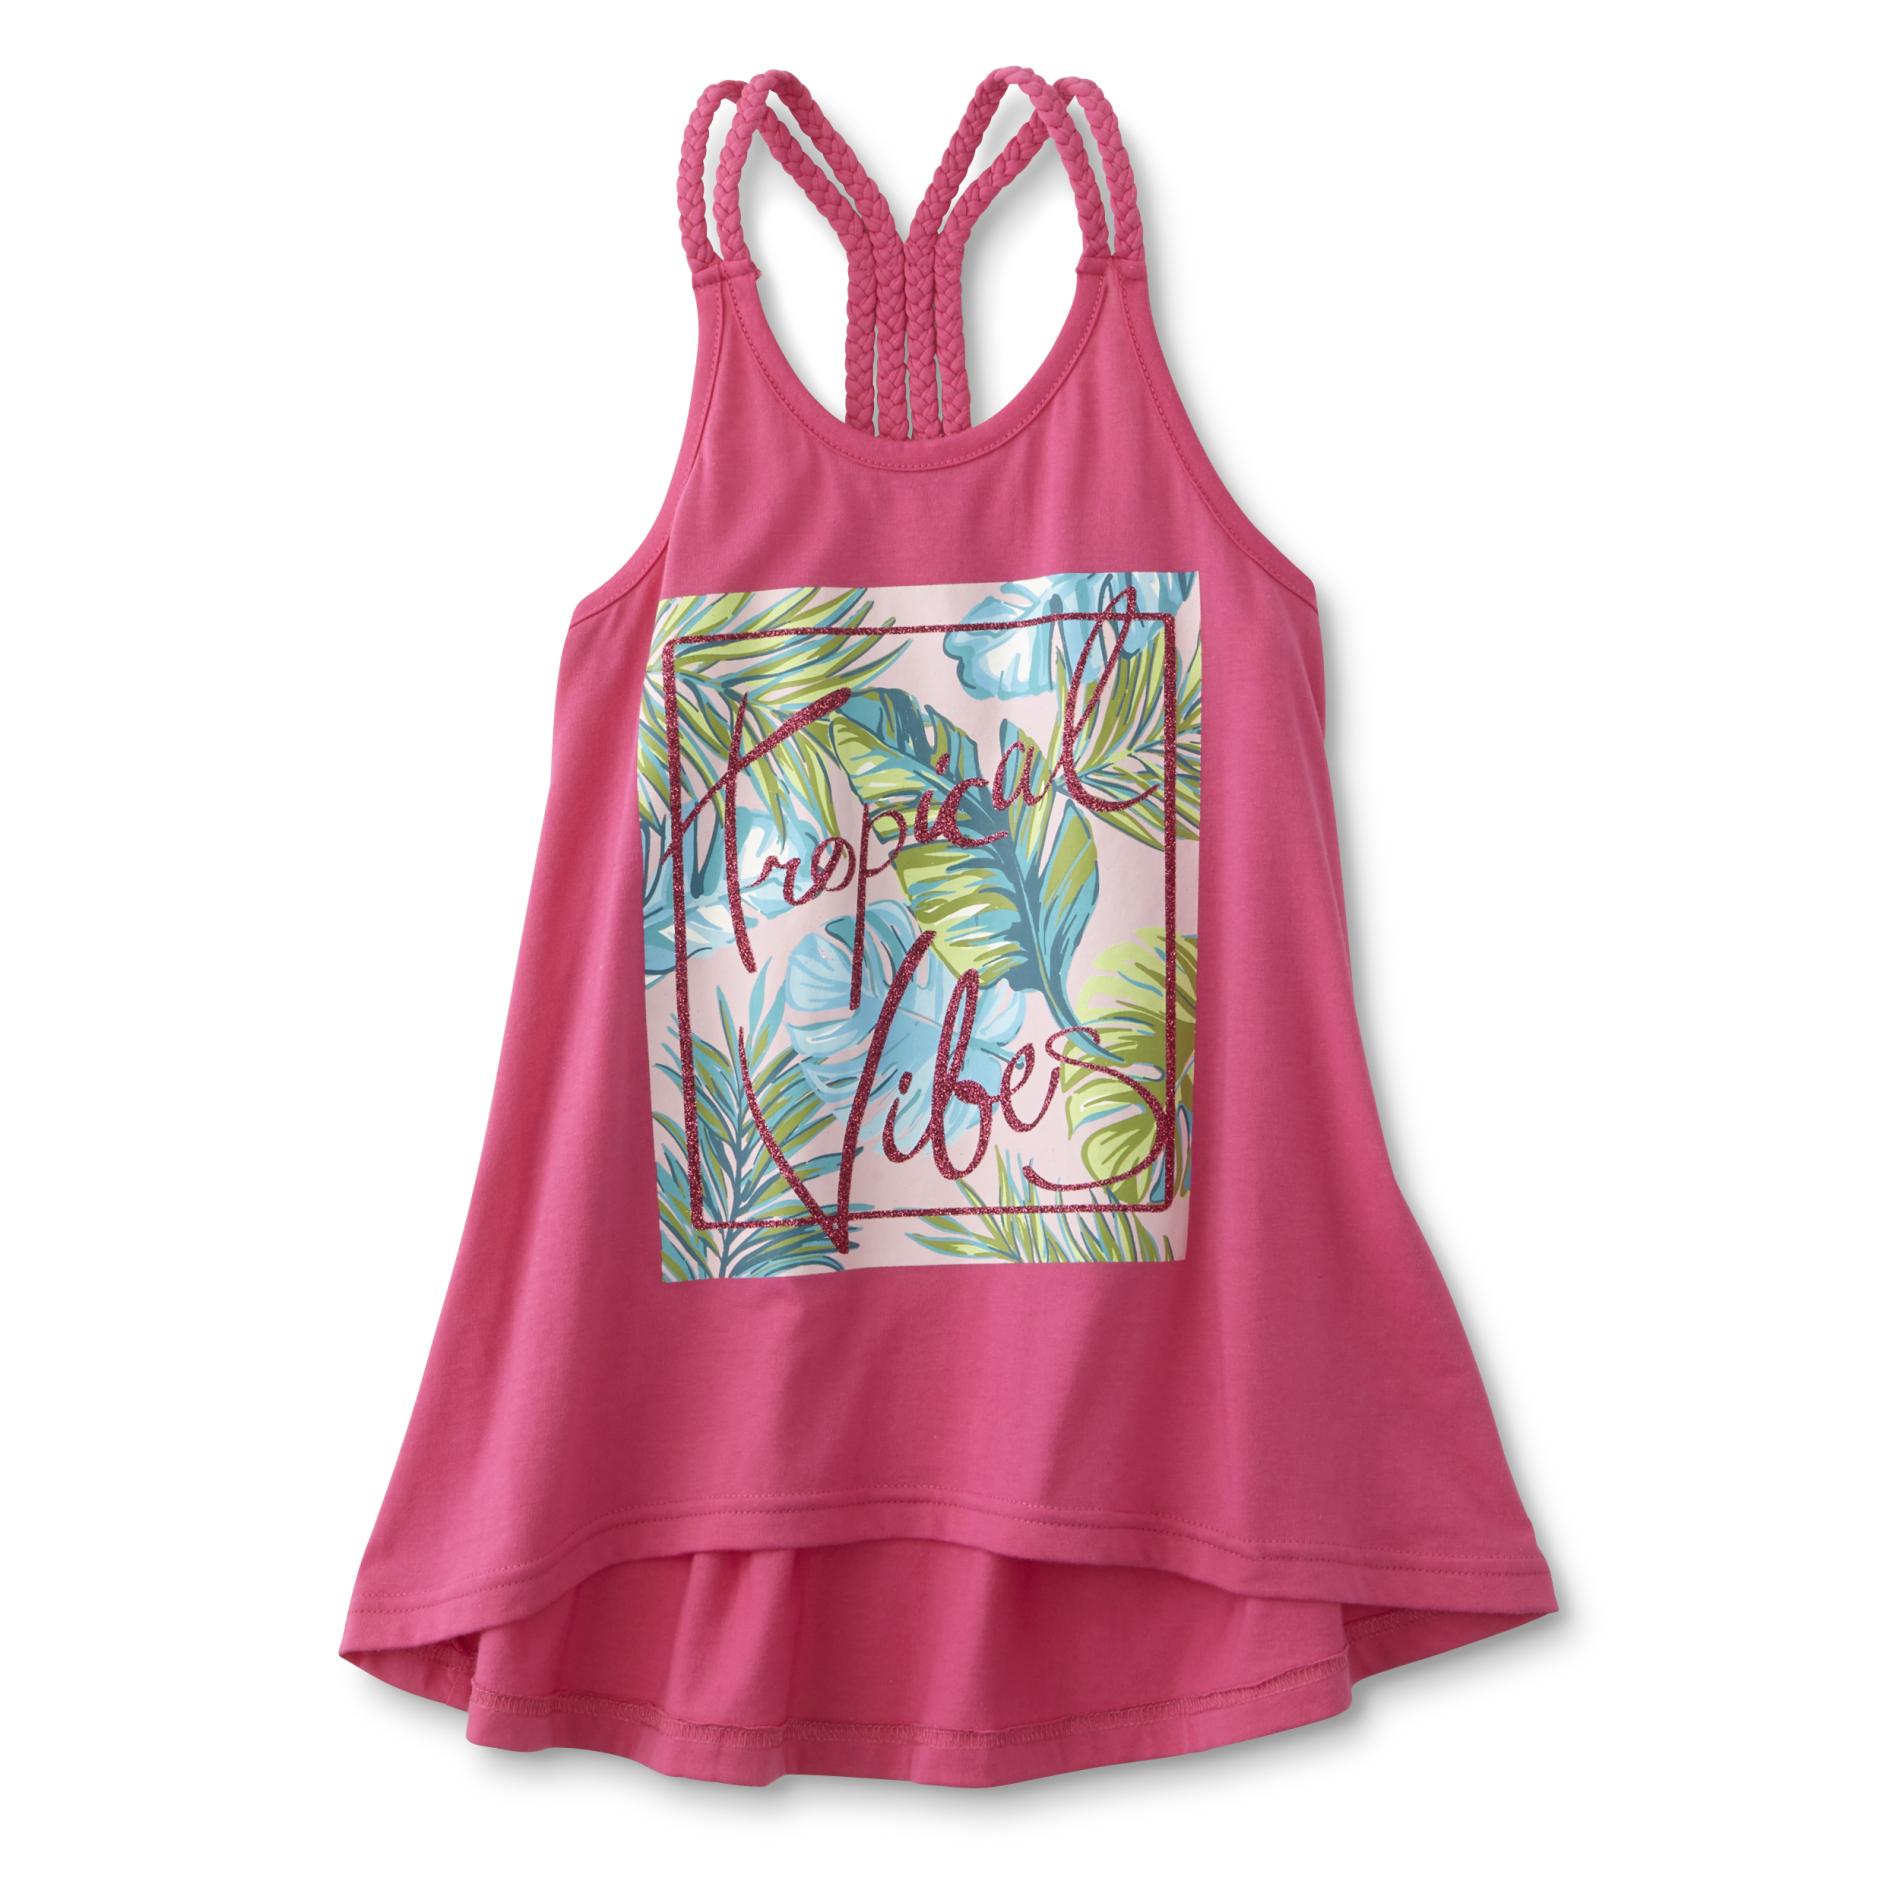 Canyon River Blues Girl's Embellished Tank Top - Tropical Life